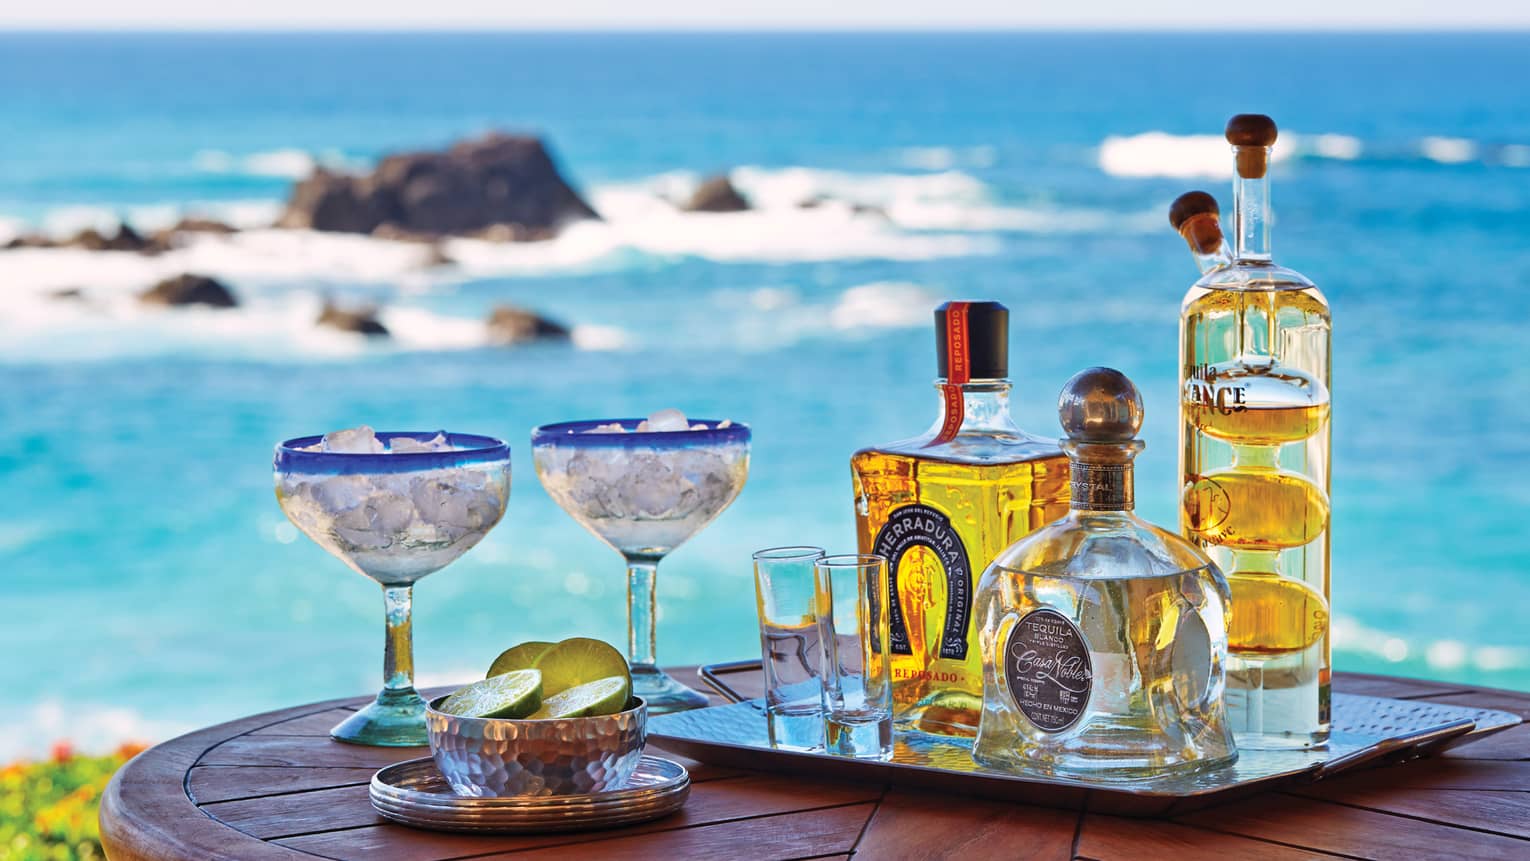 Close-up of Cora Lounge table, tray with tequila bottles, two margarita glasses with ice, bowl of limes